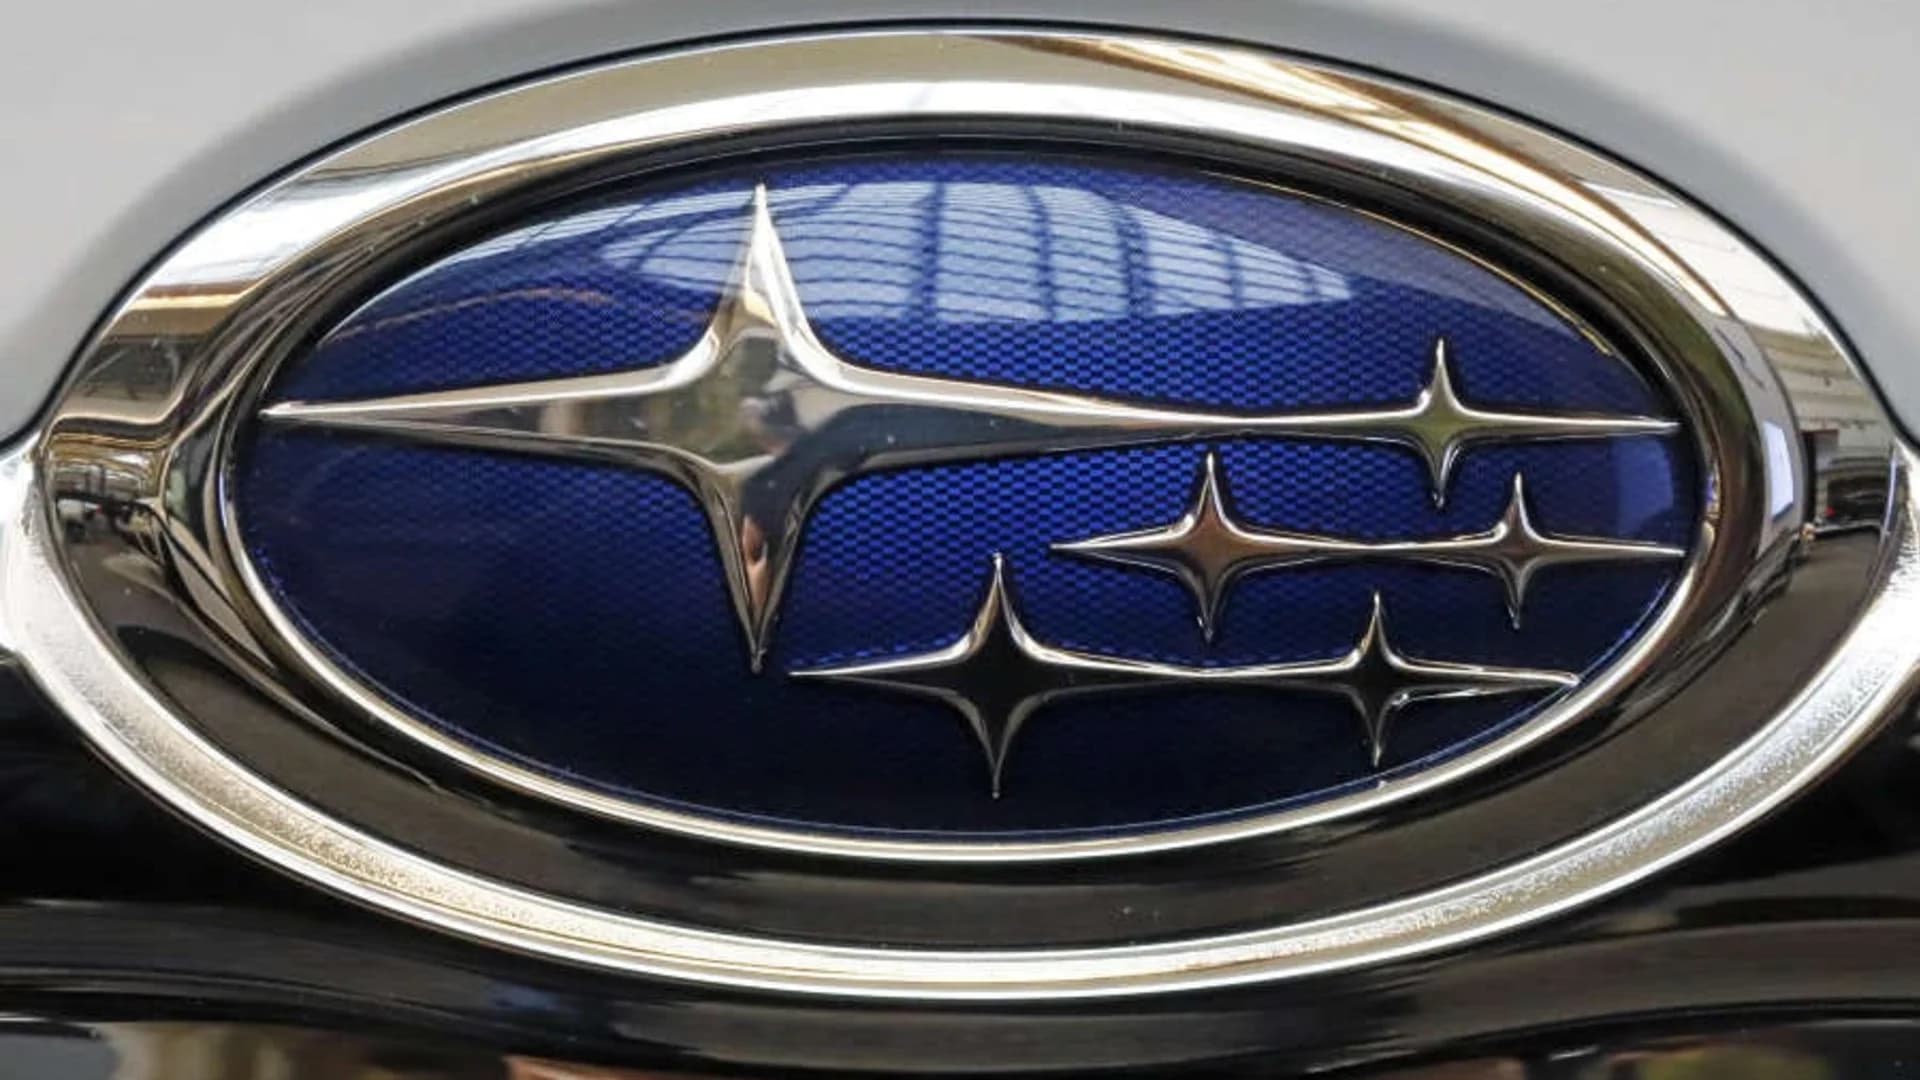 Government probing complaints of air bag sensor issues on some Subarus